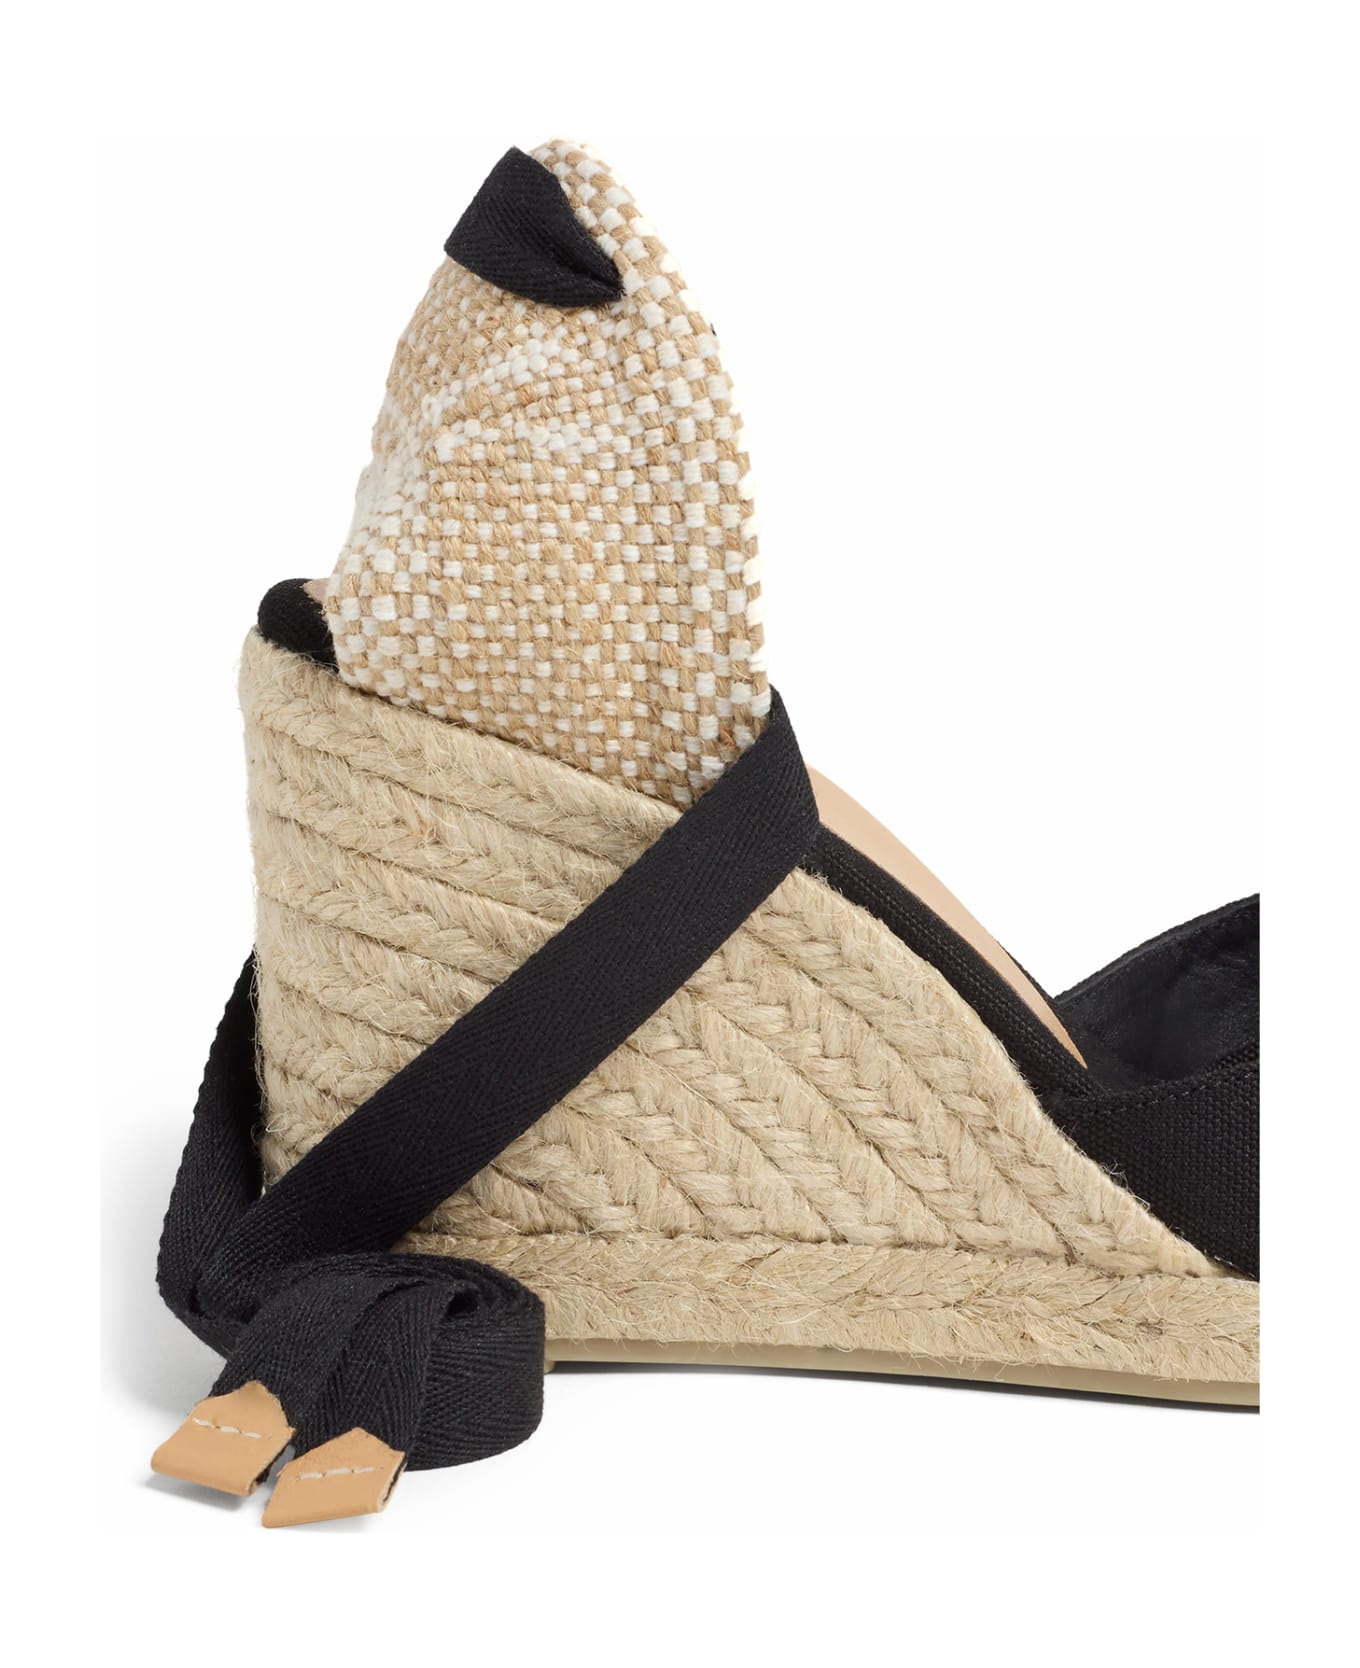 Castañer Espadrilles Carina Black With Laces At The Ankle - Negro ウェッジシューズ